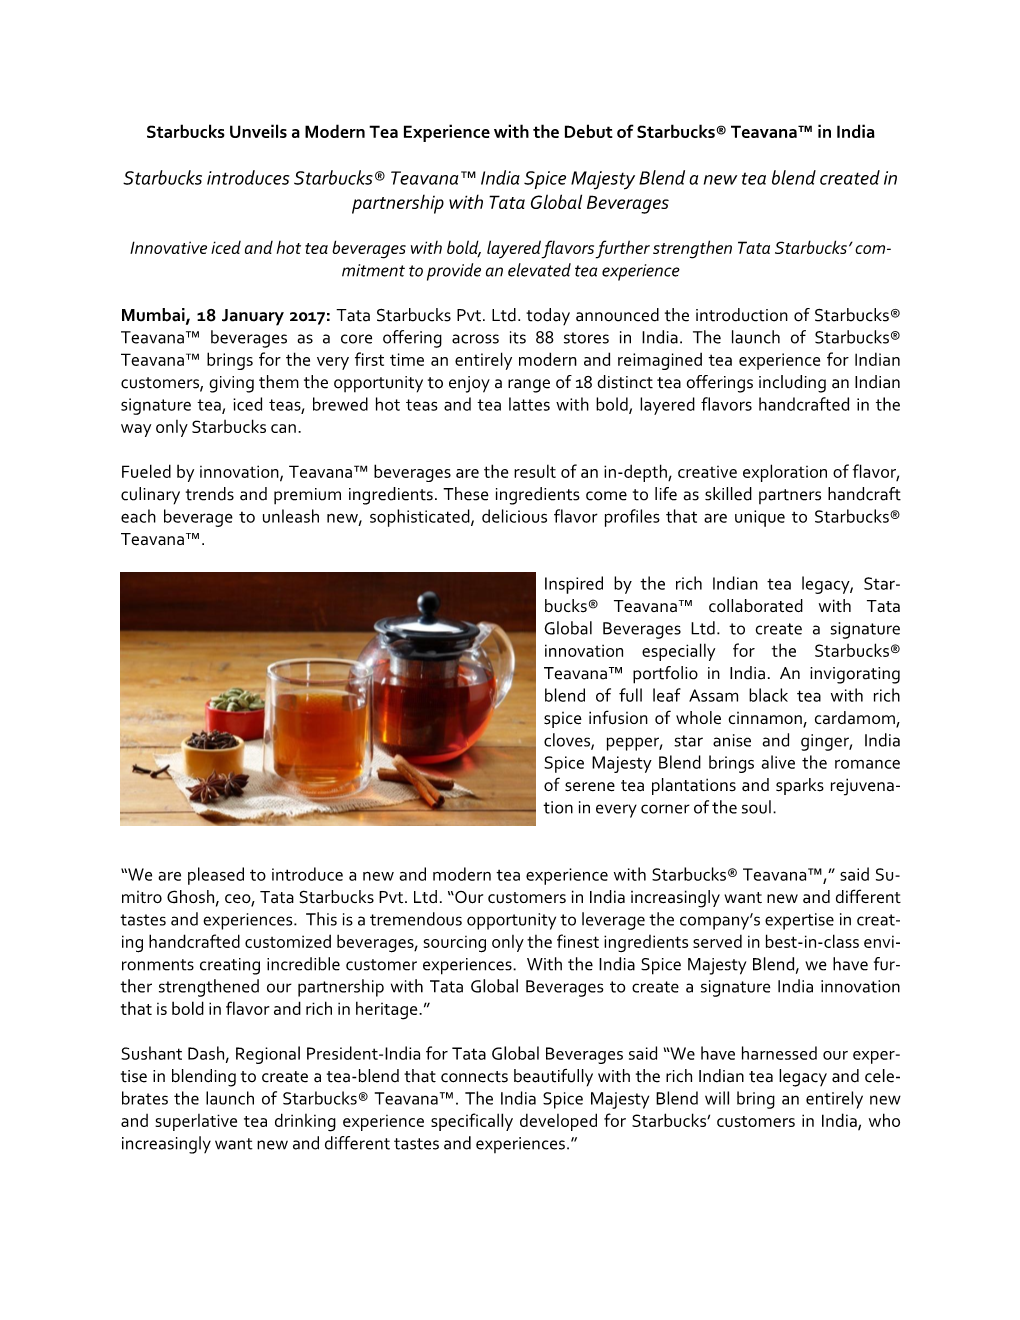 Starbucks Introduces Starbucks® Teavana™ India Spice Majesty Blend a New Tea Blend Created in Partnership with Tata Global Beverages